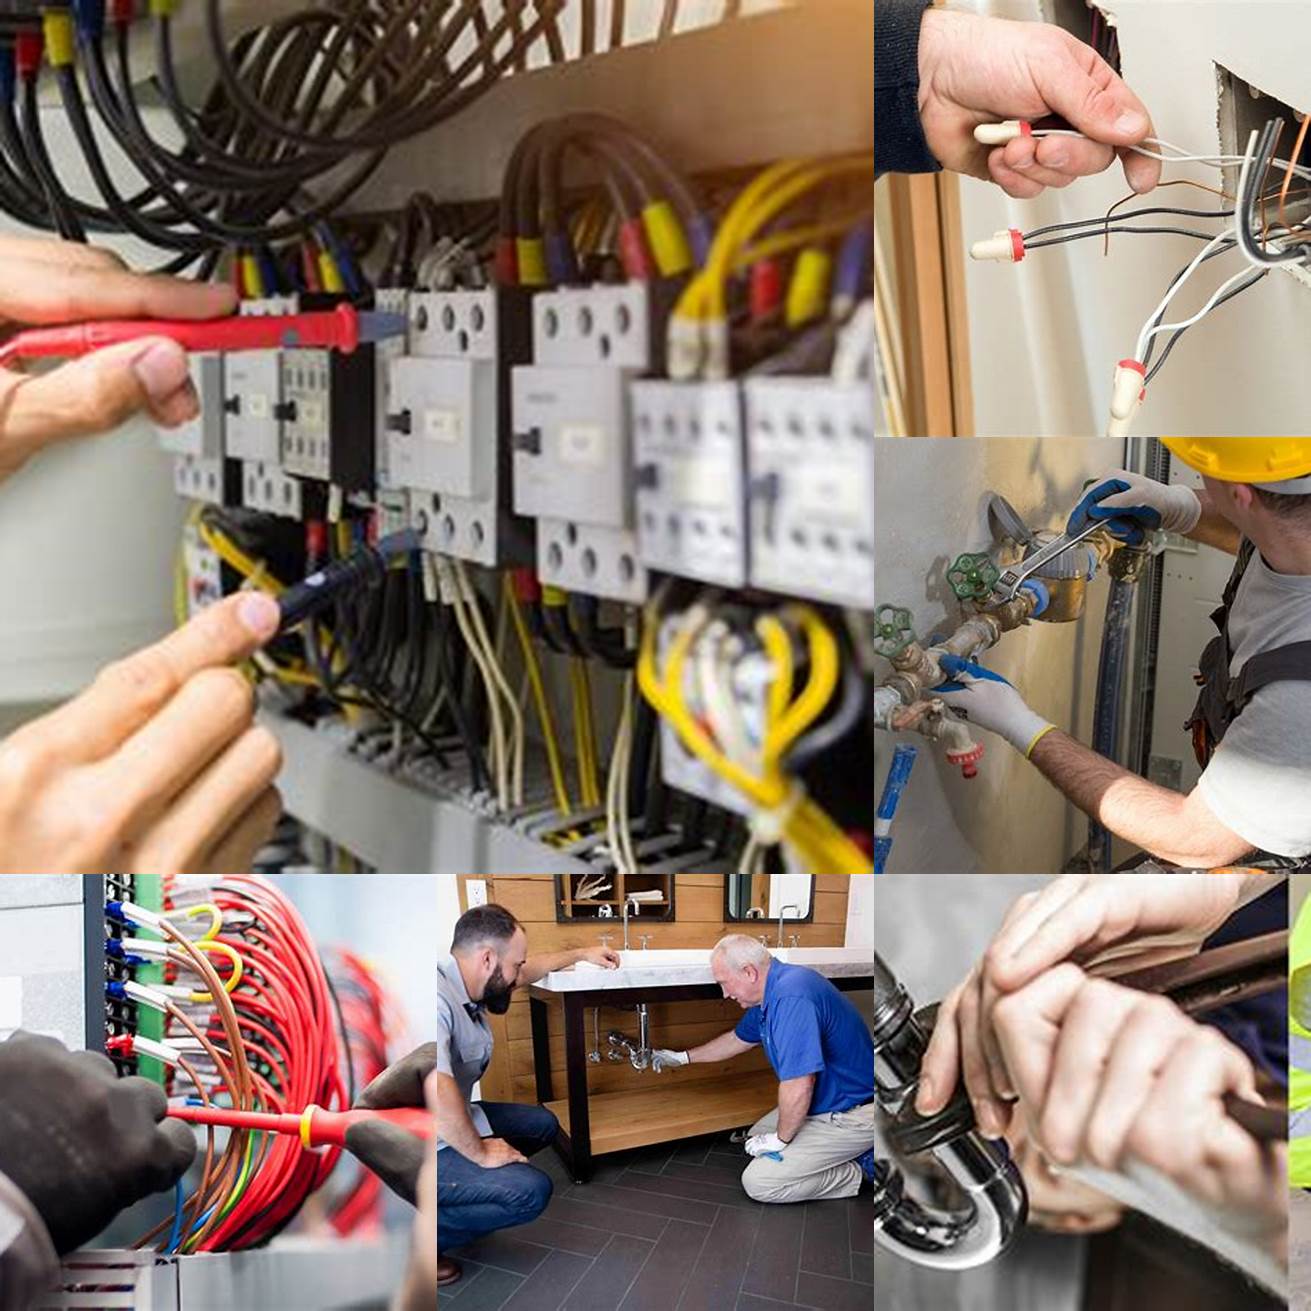 They may require professional installation to ensure that the plumbing and electrical connections are safe and up to code